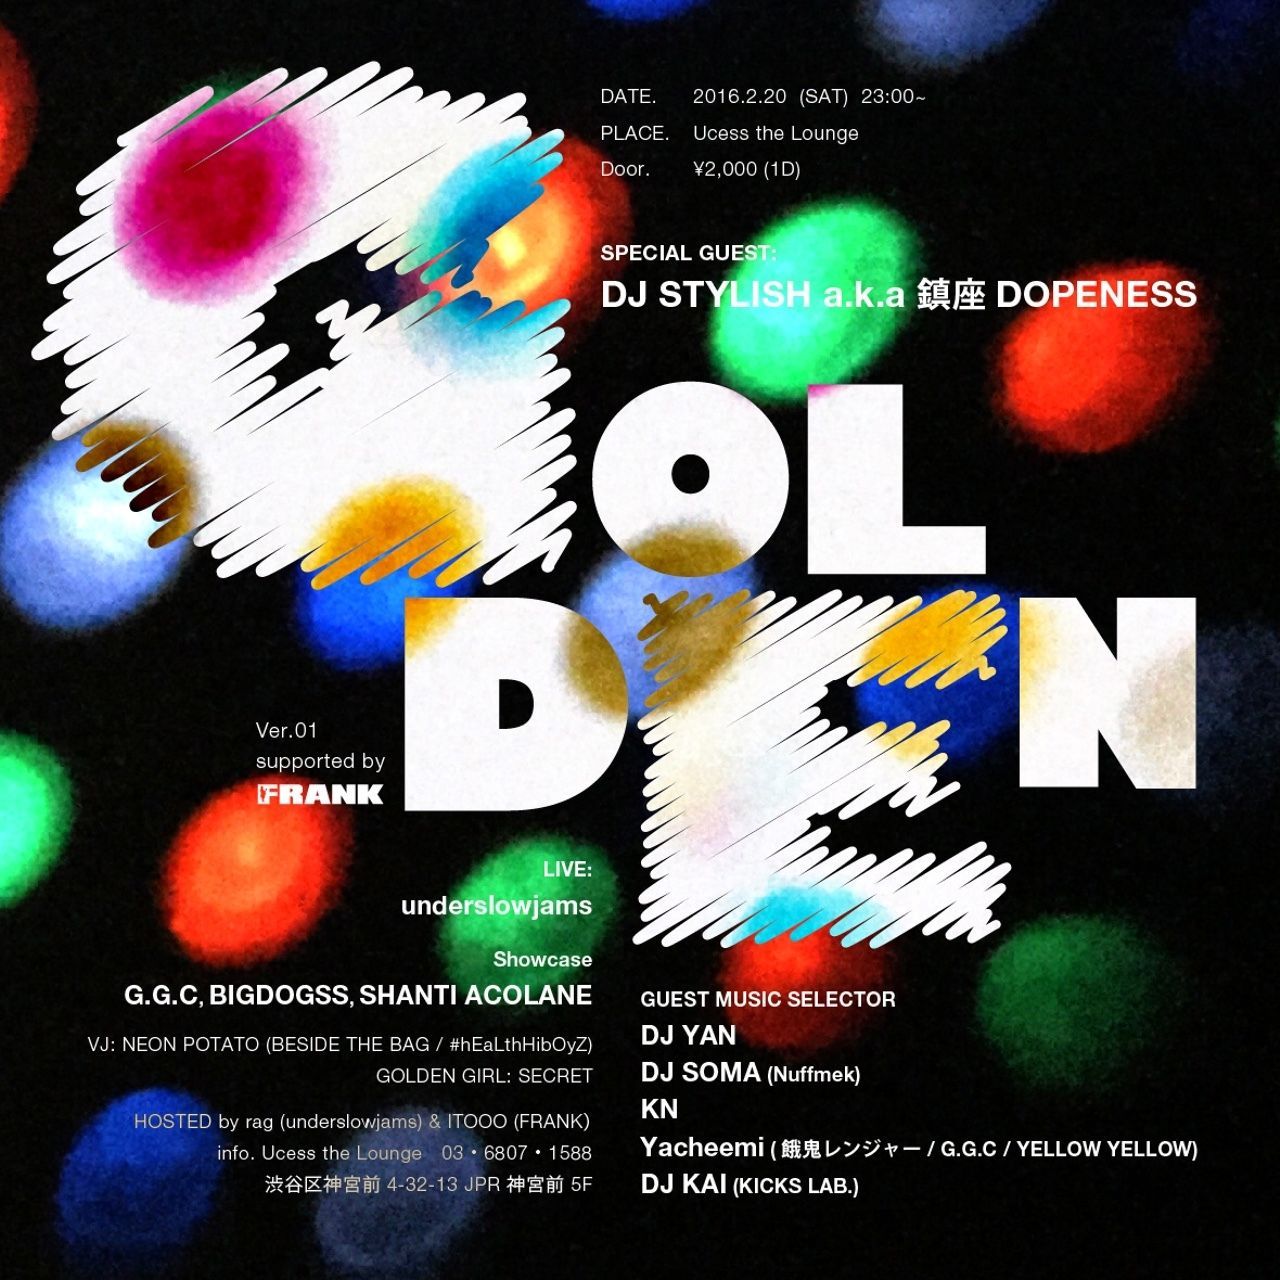 GOLDEN ver.01 supported by FRANK